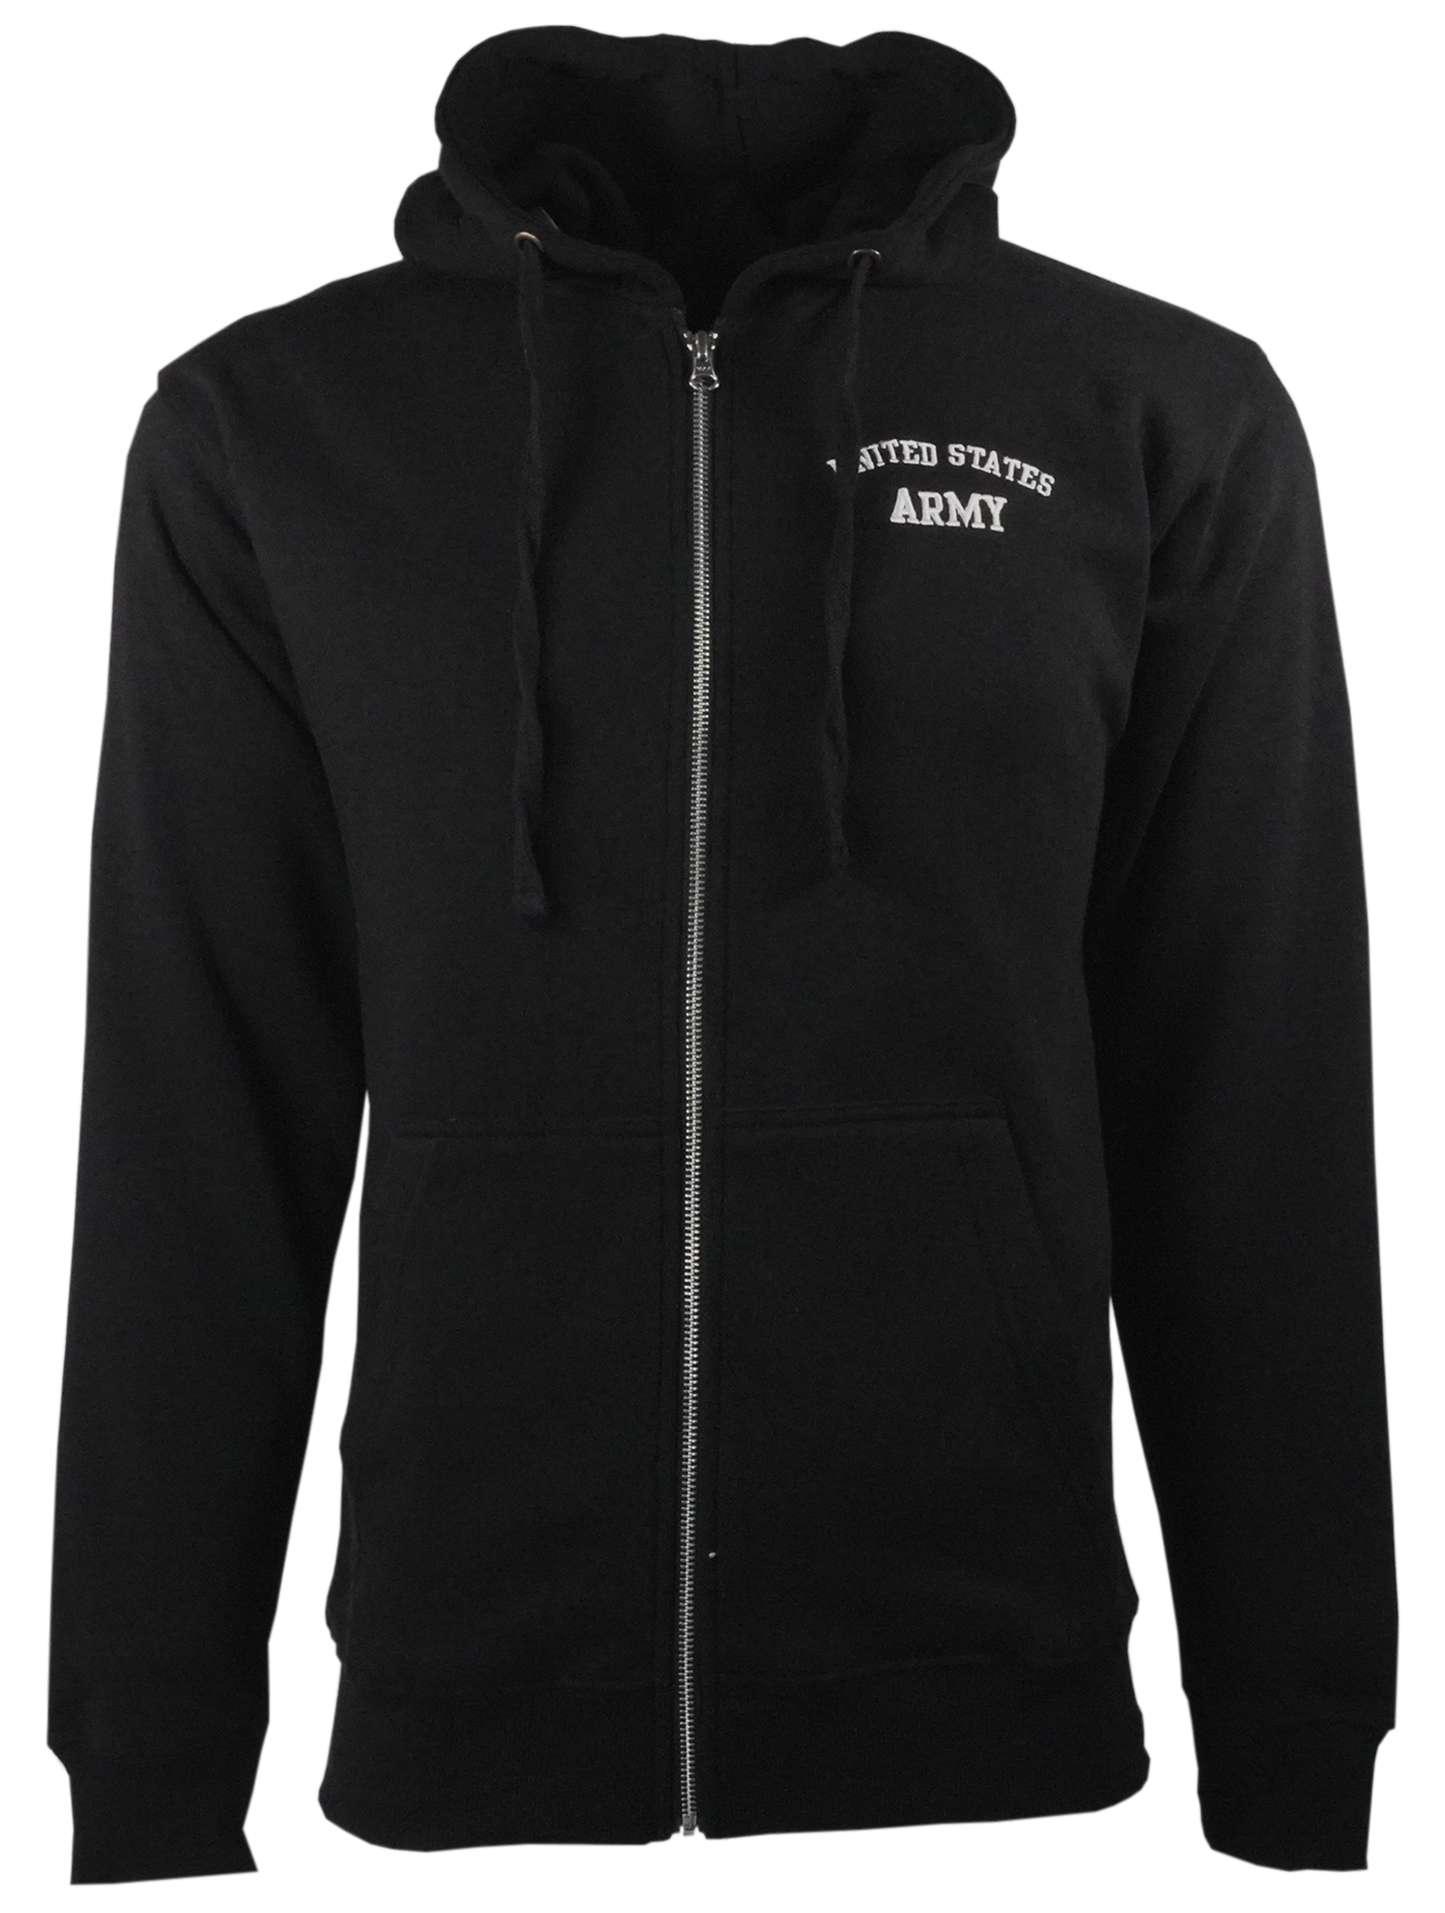 United States Army on Fleece Zip Up Hoodie